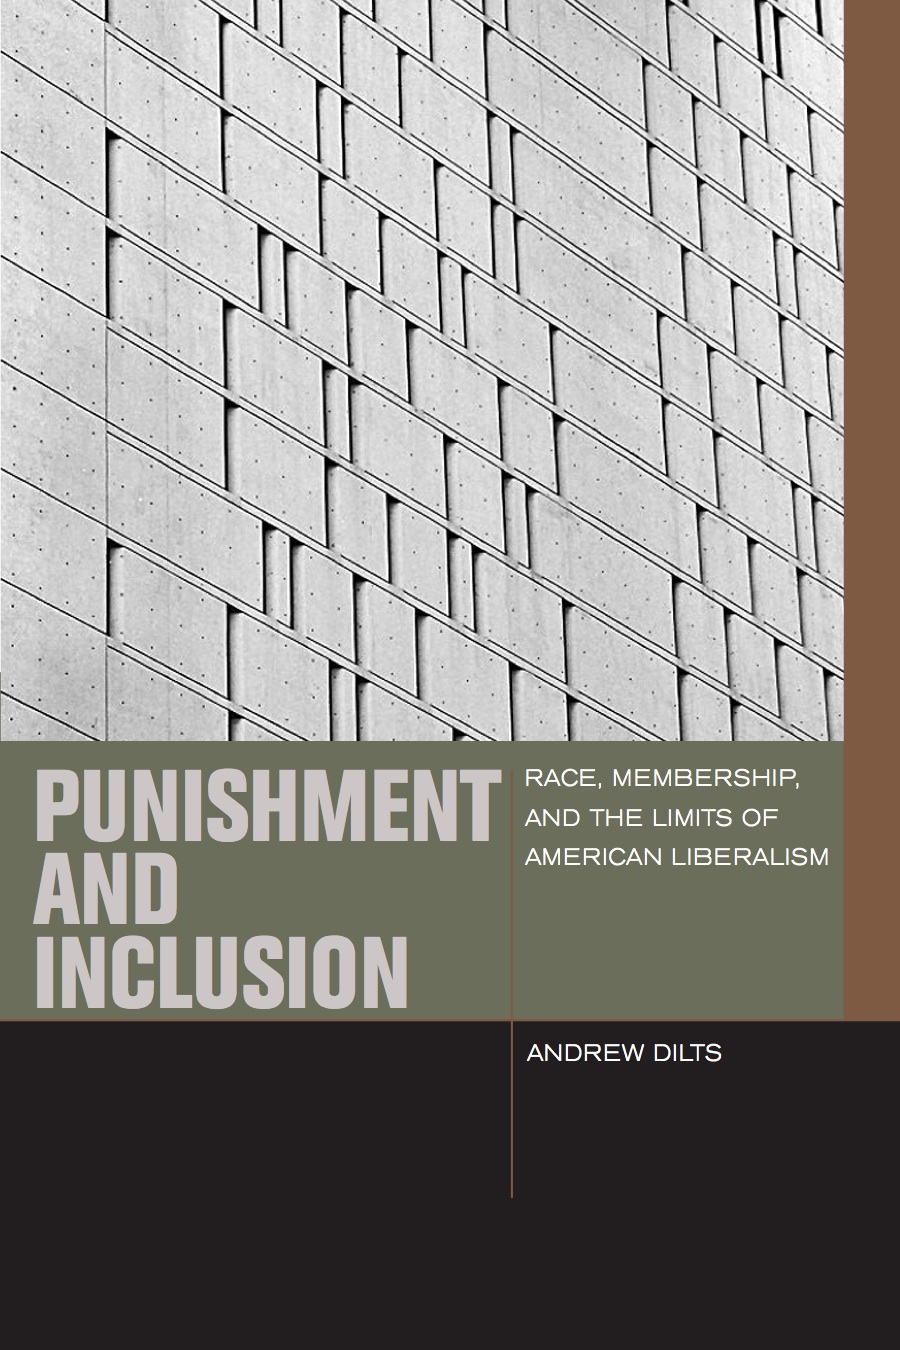 Punishment and Inclusion by Andrew Dilts